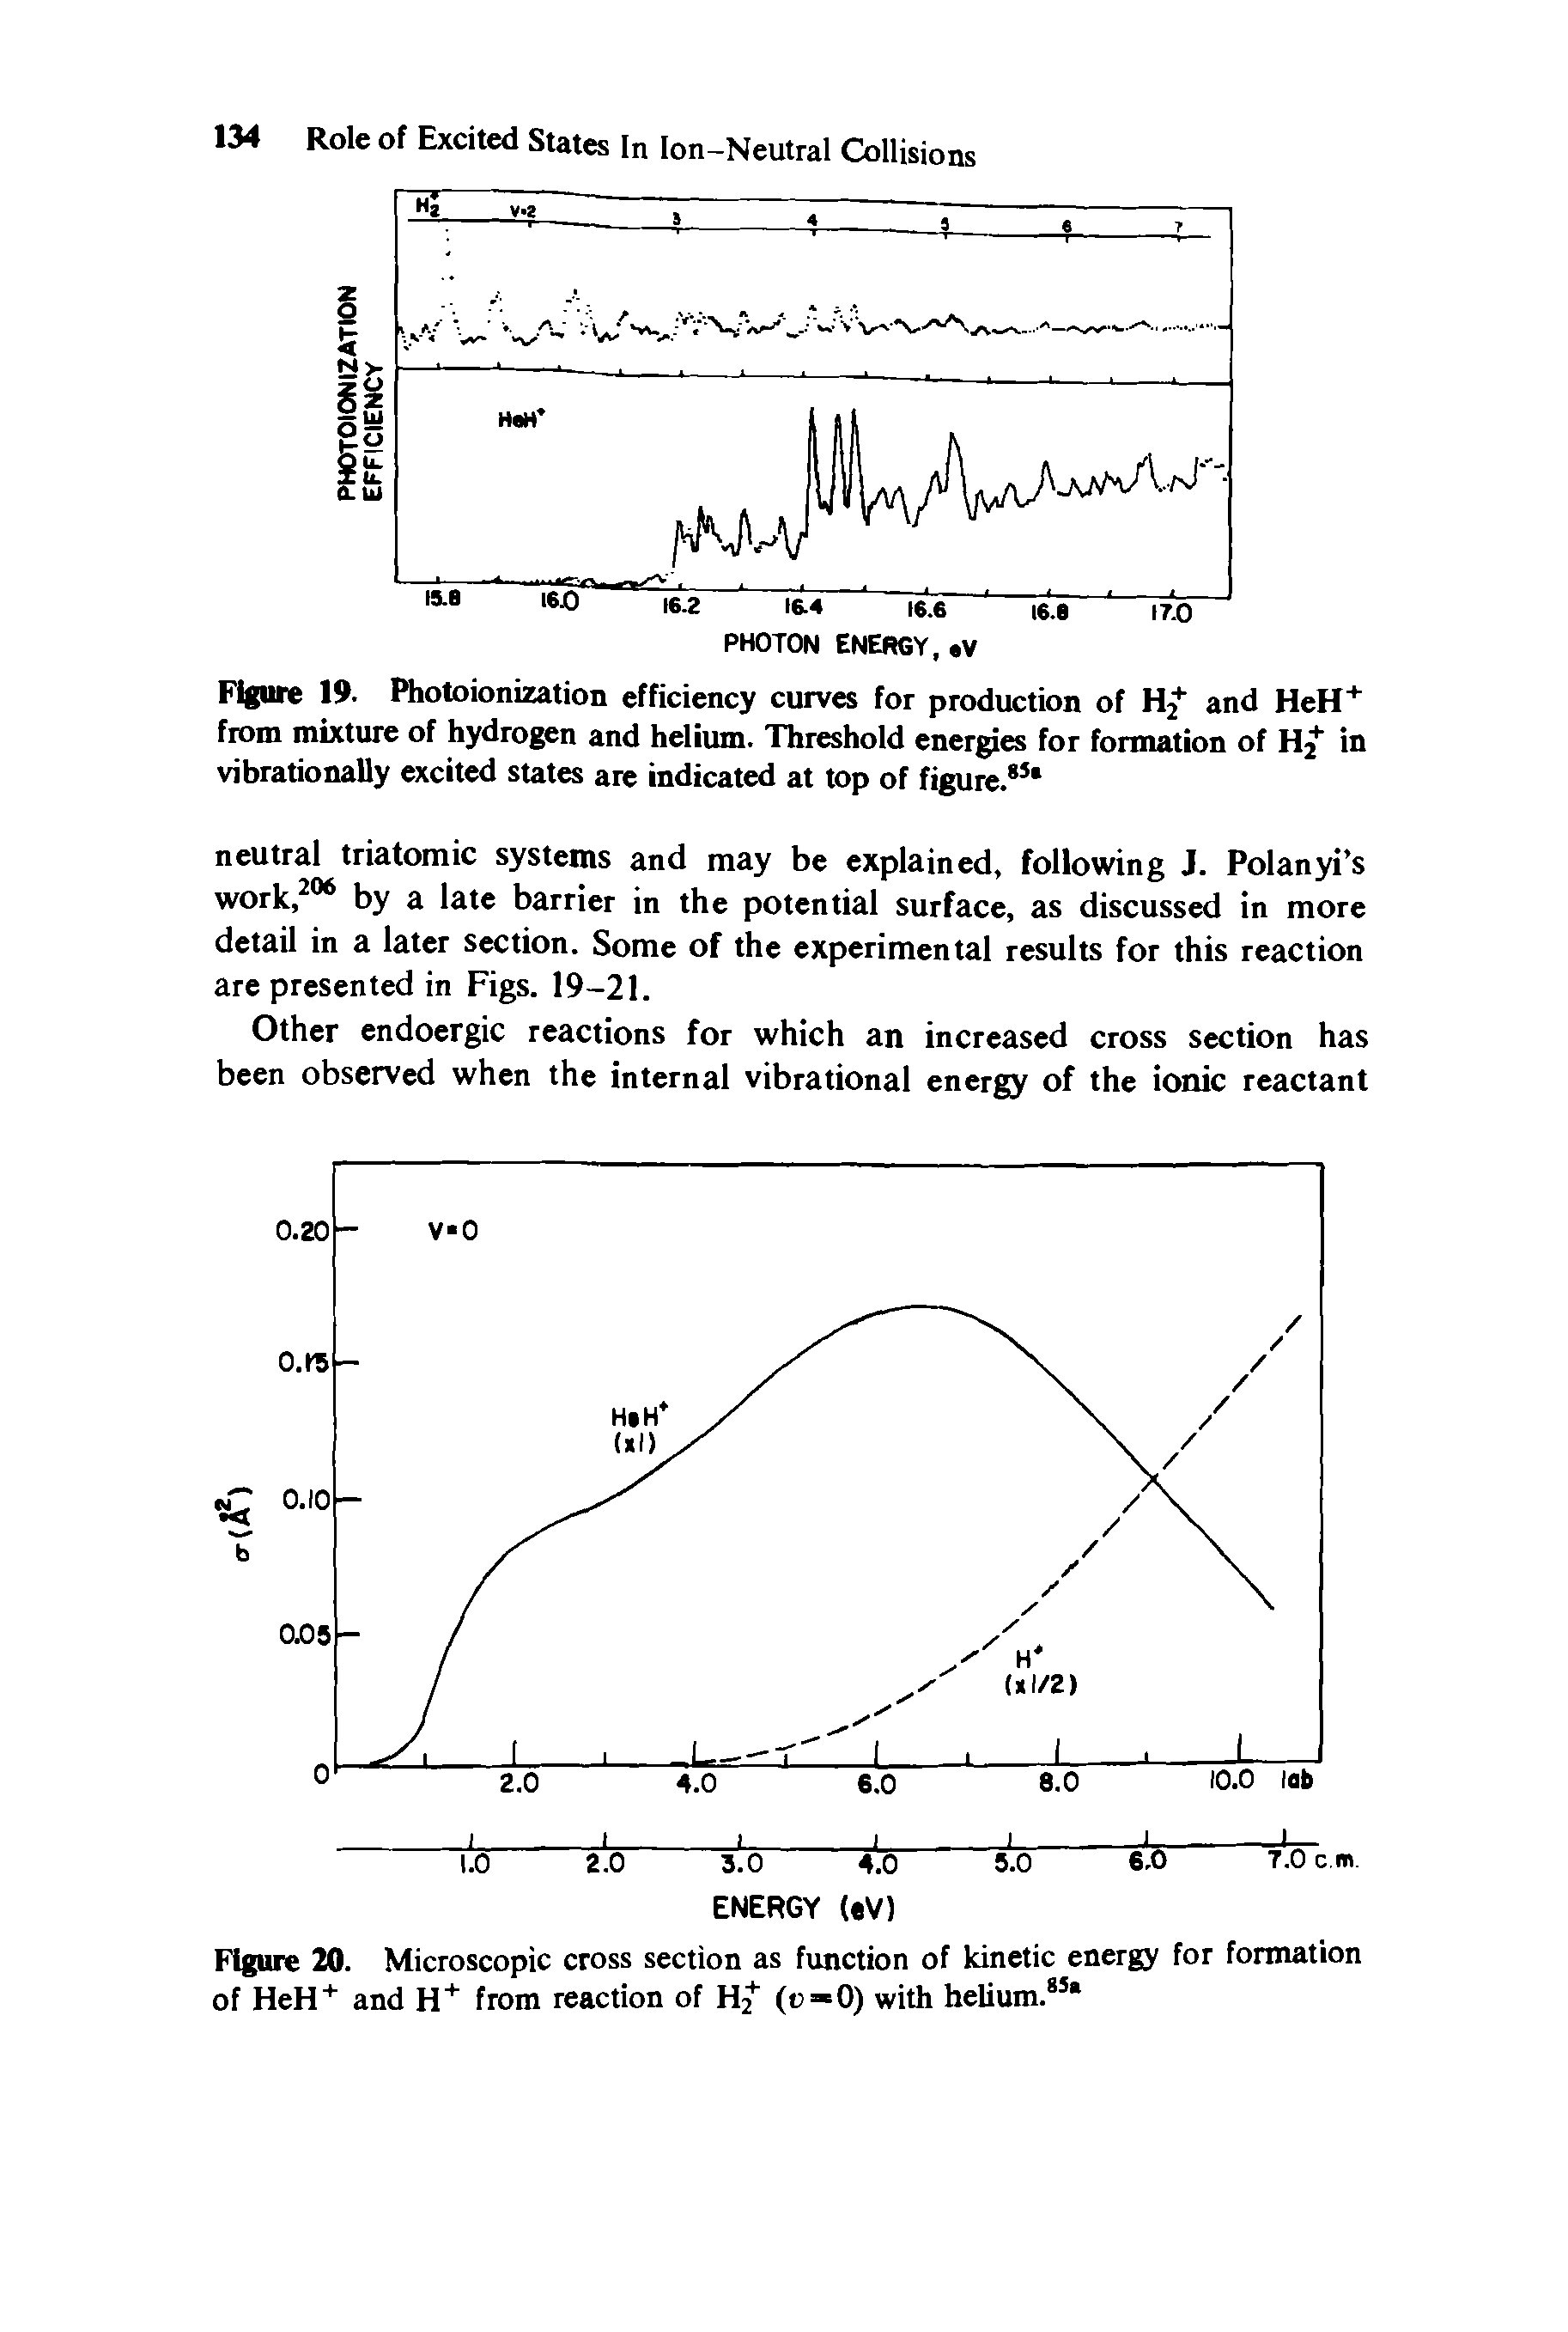 Figure 19- Photoionization efficiency curves for production of H2+ and HeH+ from mixture of hydrogen and helium. Threshold energies for formation of Hj" in vibrationally excited states are indicated at top of figure.85 ...